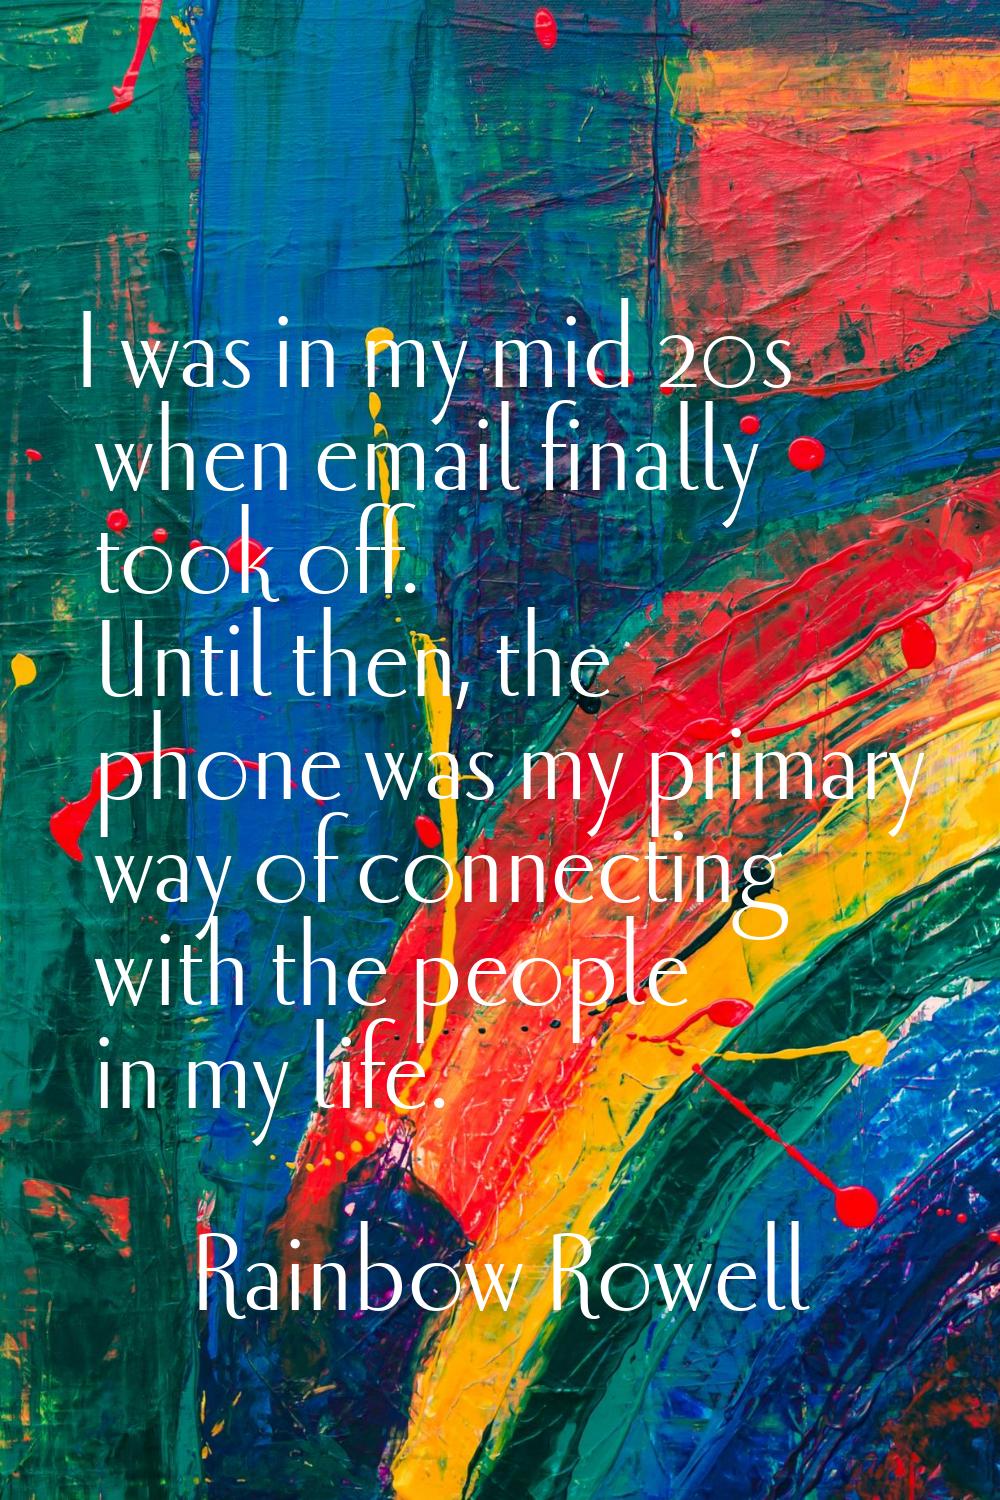 I was in my mid 20s when email finally took off. Until then, the phone was my primary way of connec